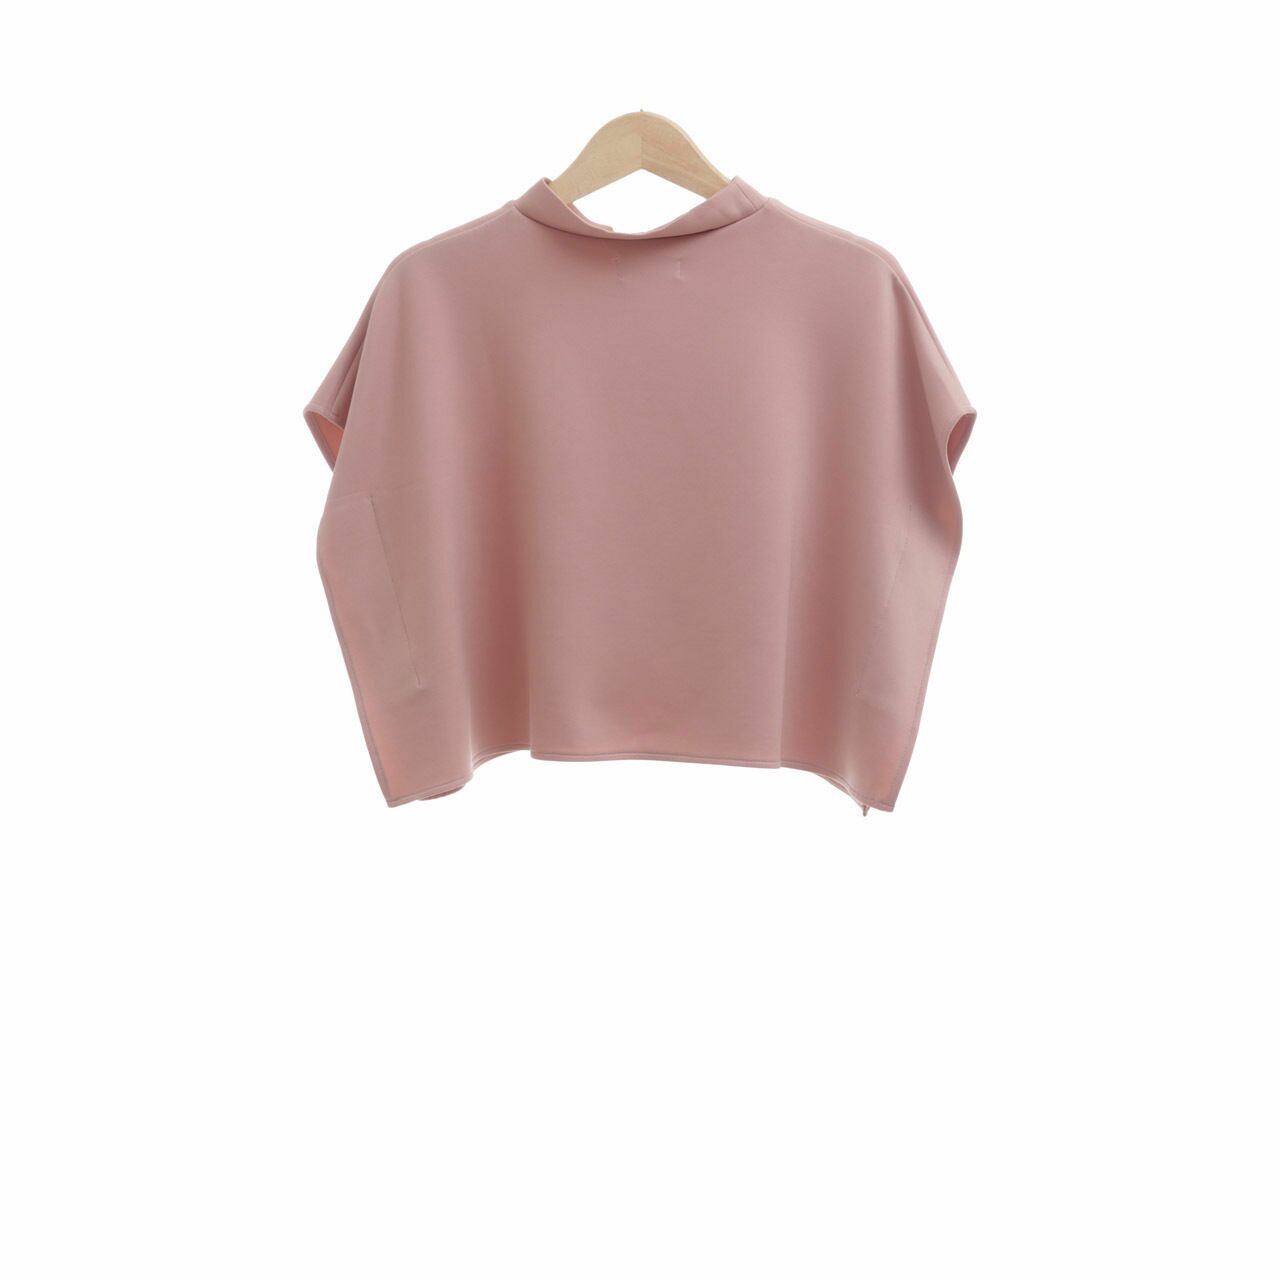 This is April X Chelsea Islan Dusty Pink Batwing Blouse